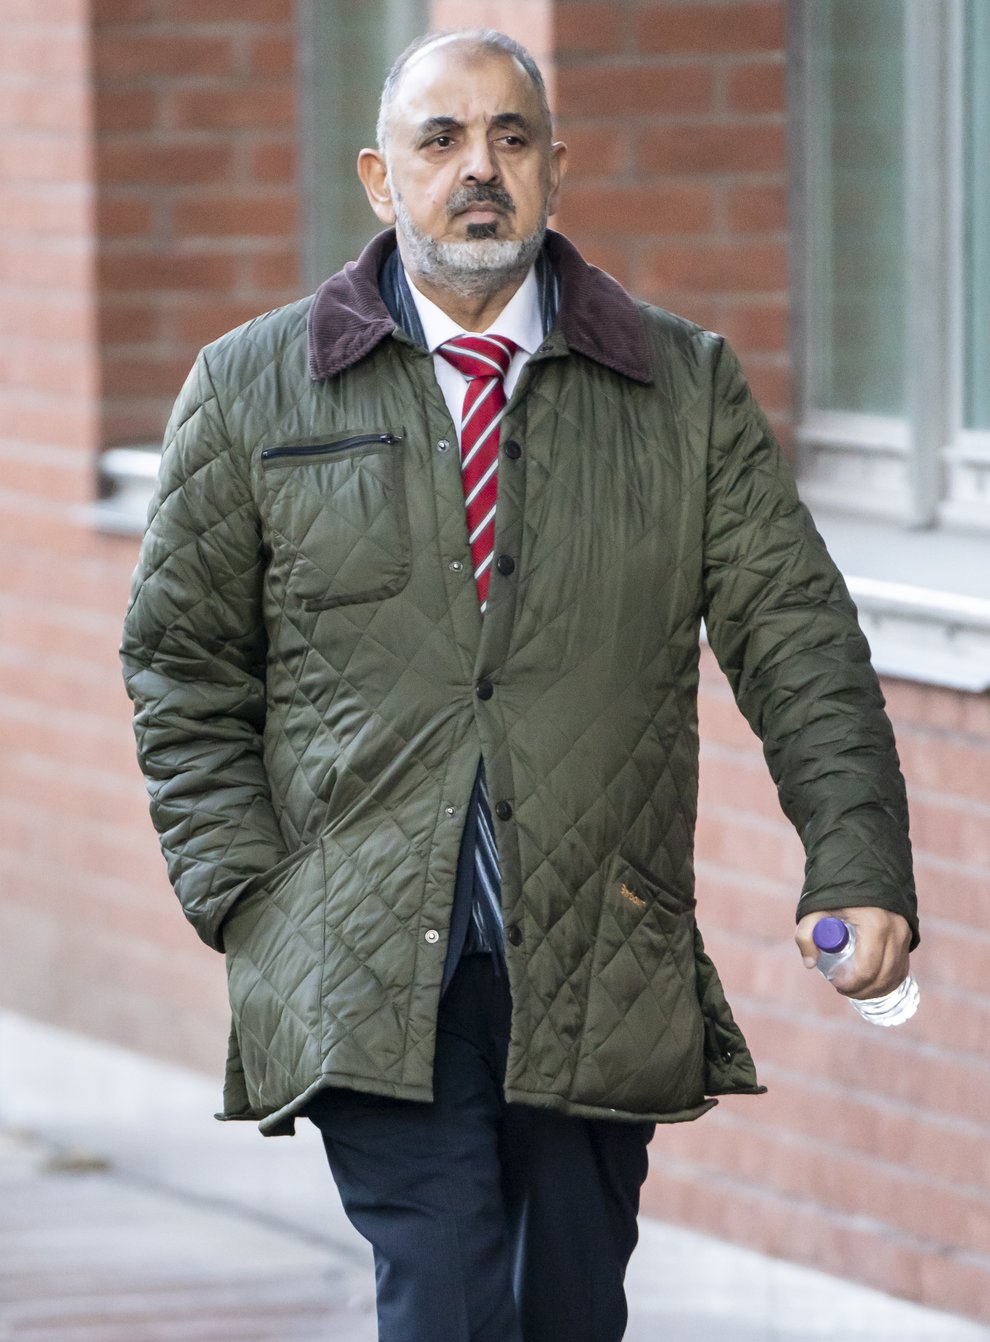 Former peer Nazir Ahmed has been found guilty at Sheffield Crown Court of attempting to rape a young girl when he was a teenager in the 1970s (Danny Lawson/PA)